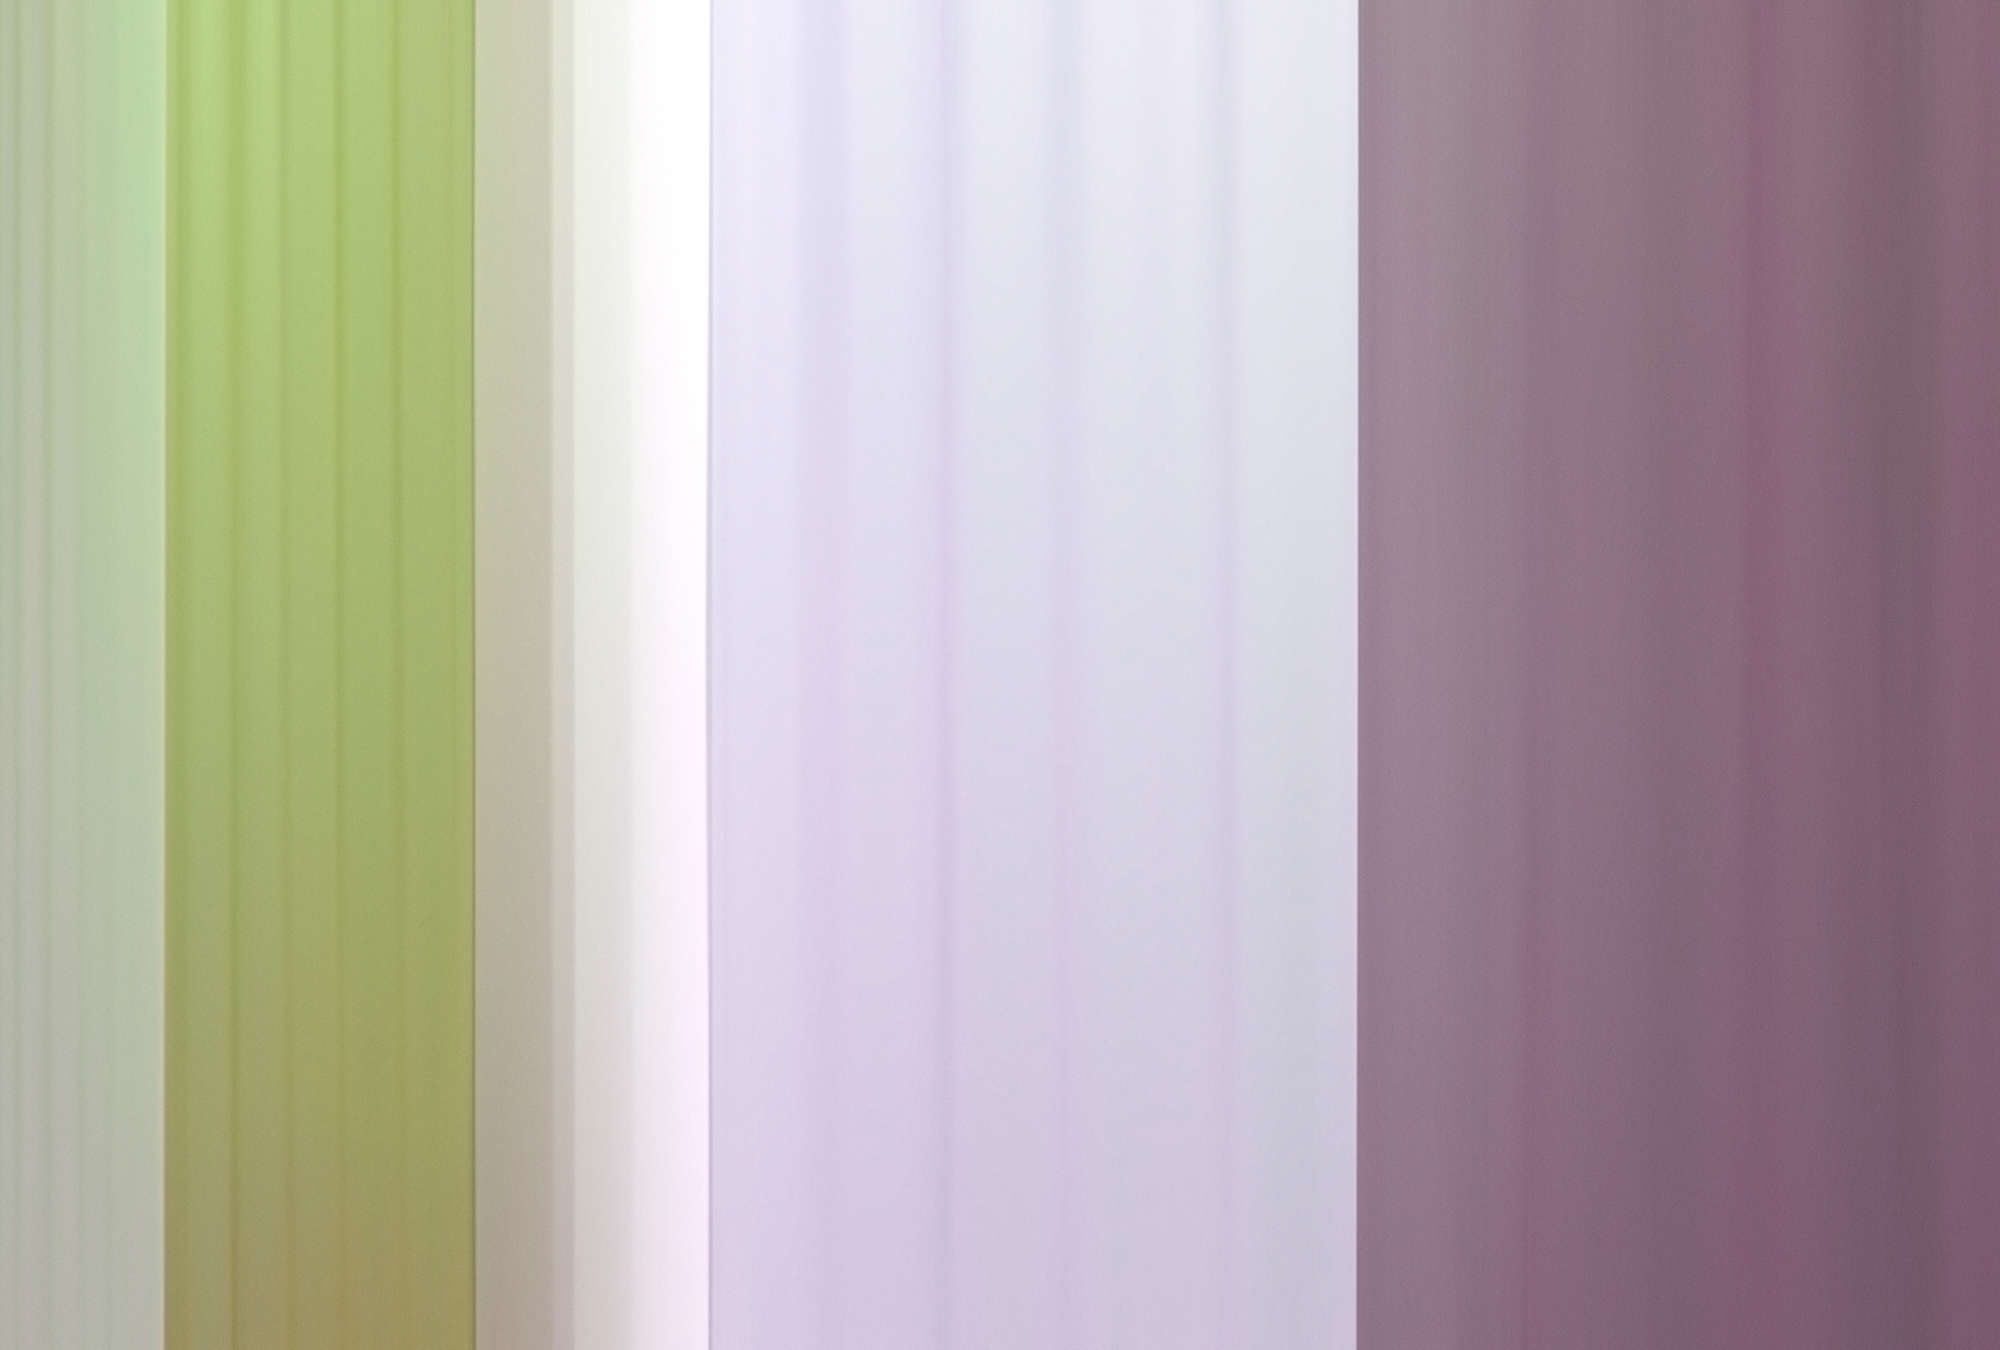             Photo wallpaper »co-coloures 3« - Colour gradient with stripes - green, lilac, purple | Lightly textured non-woven
        